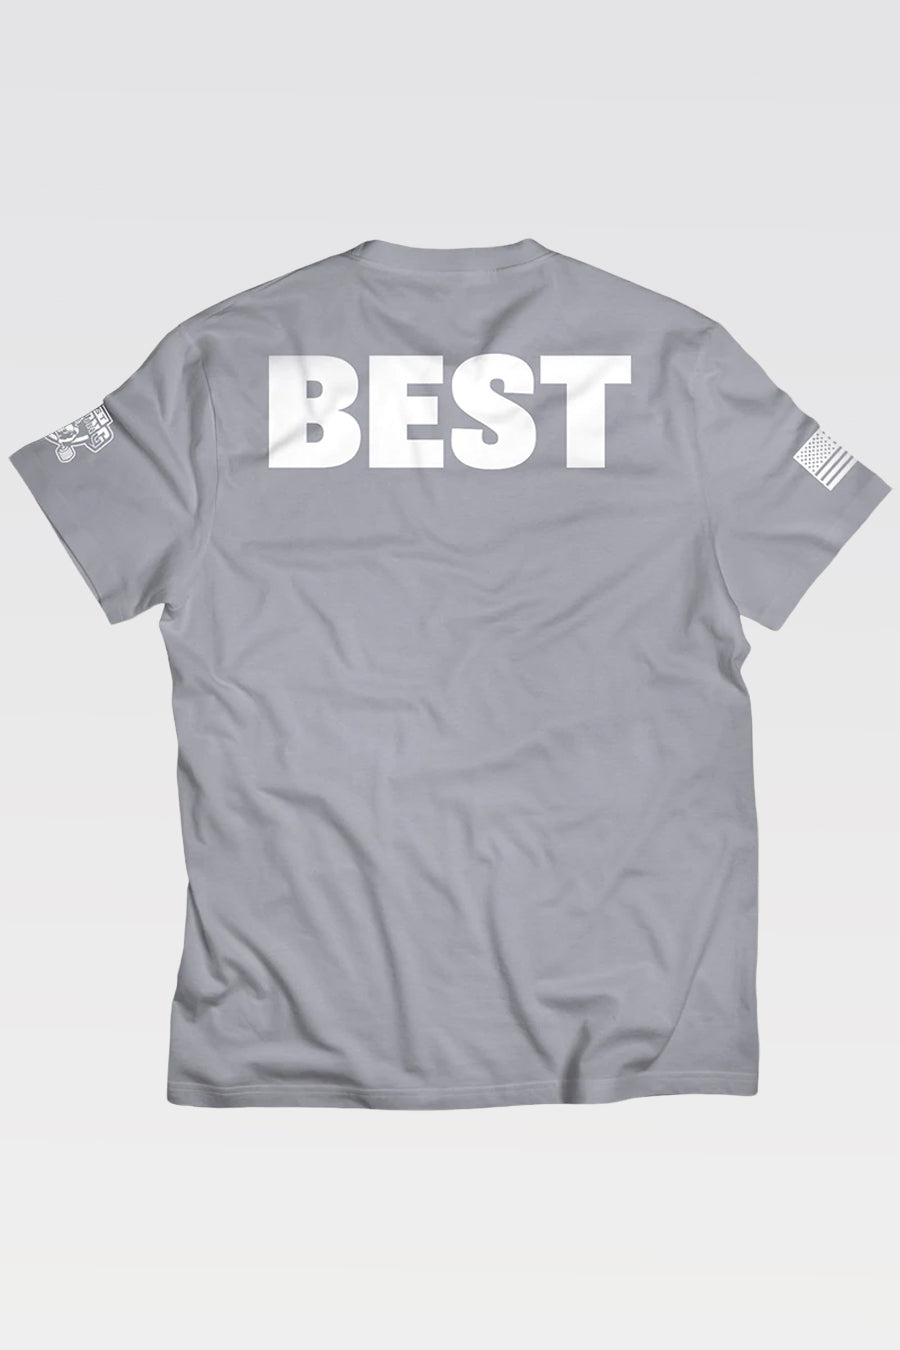 Nick Best Competition Tee